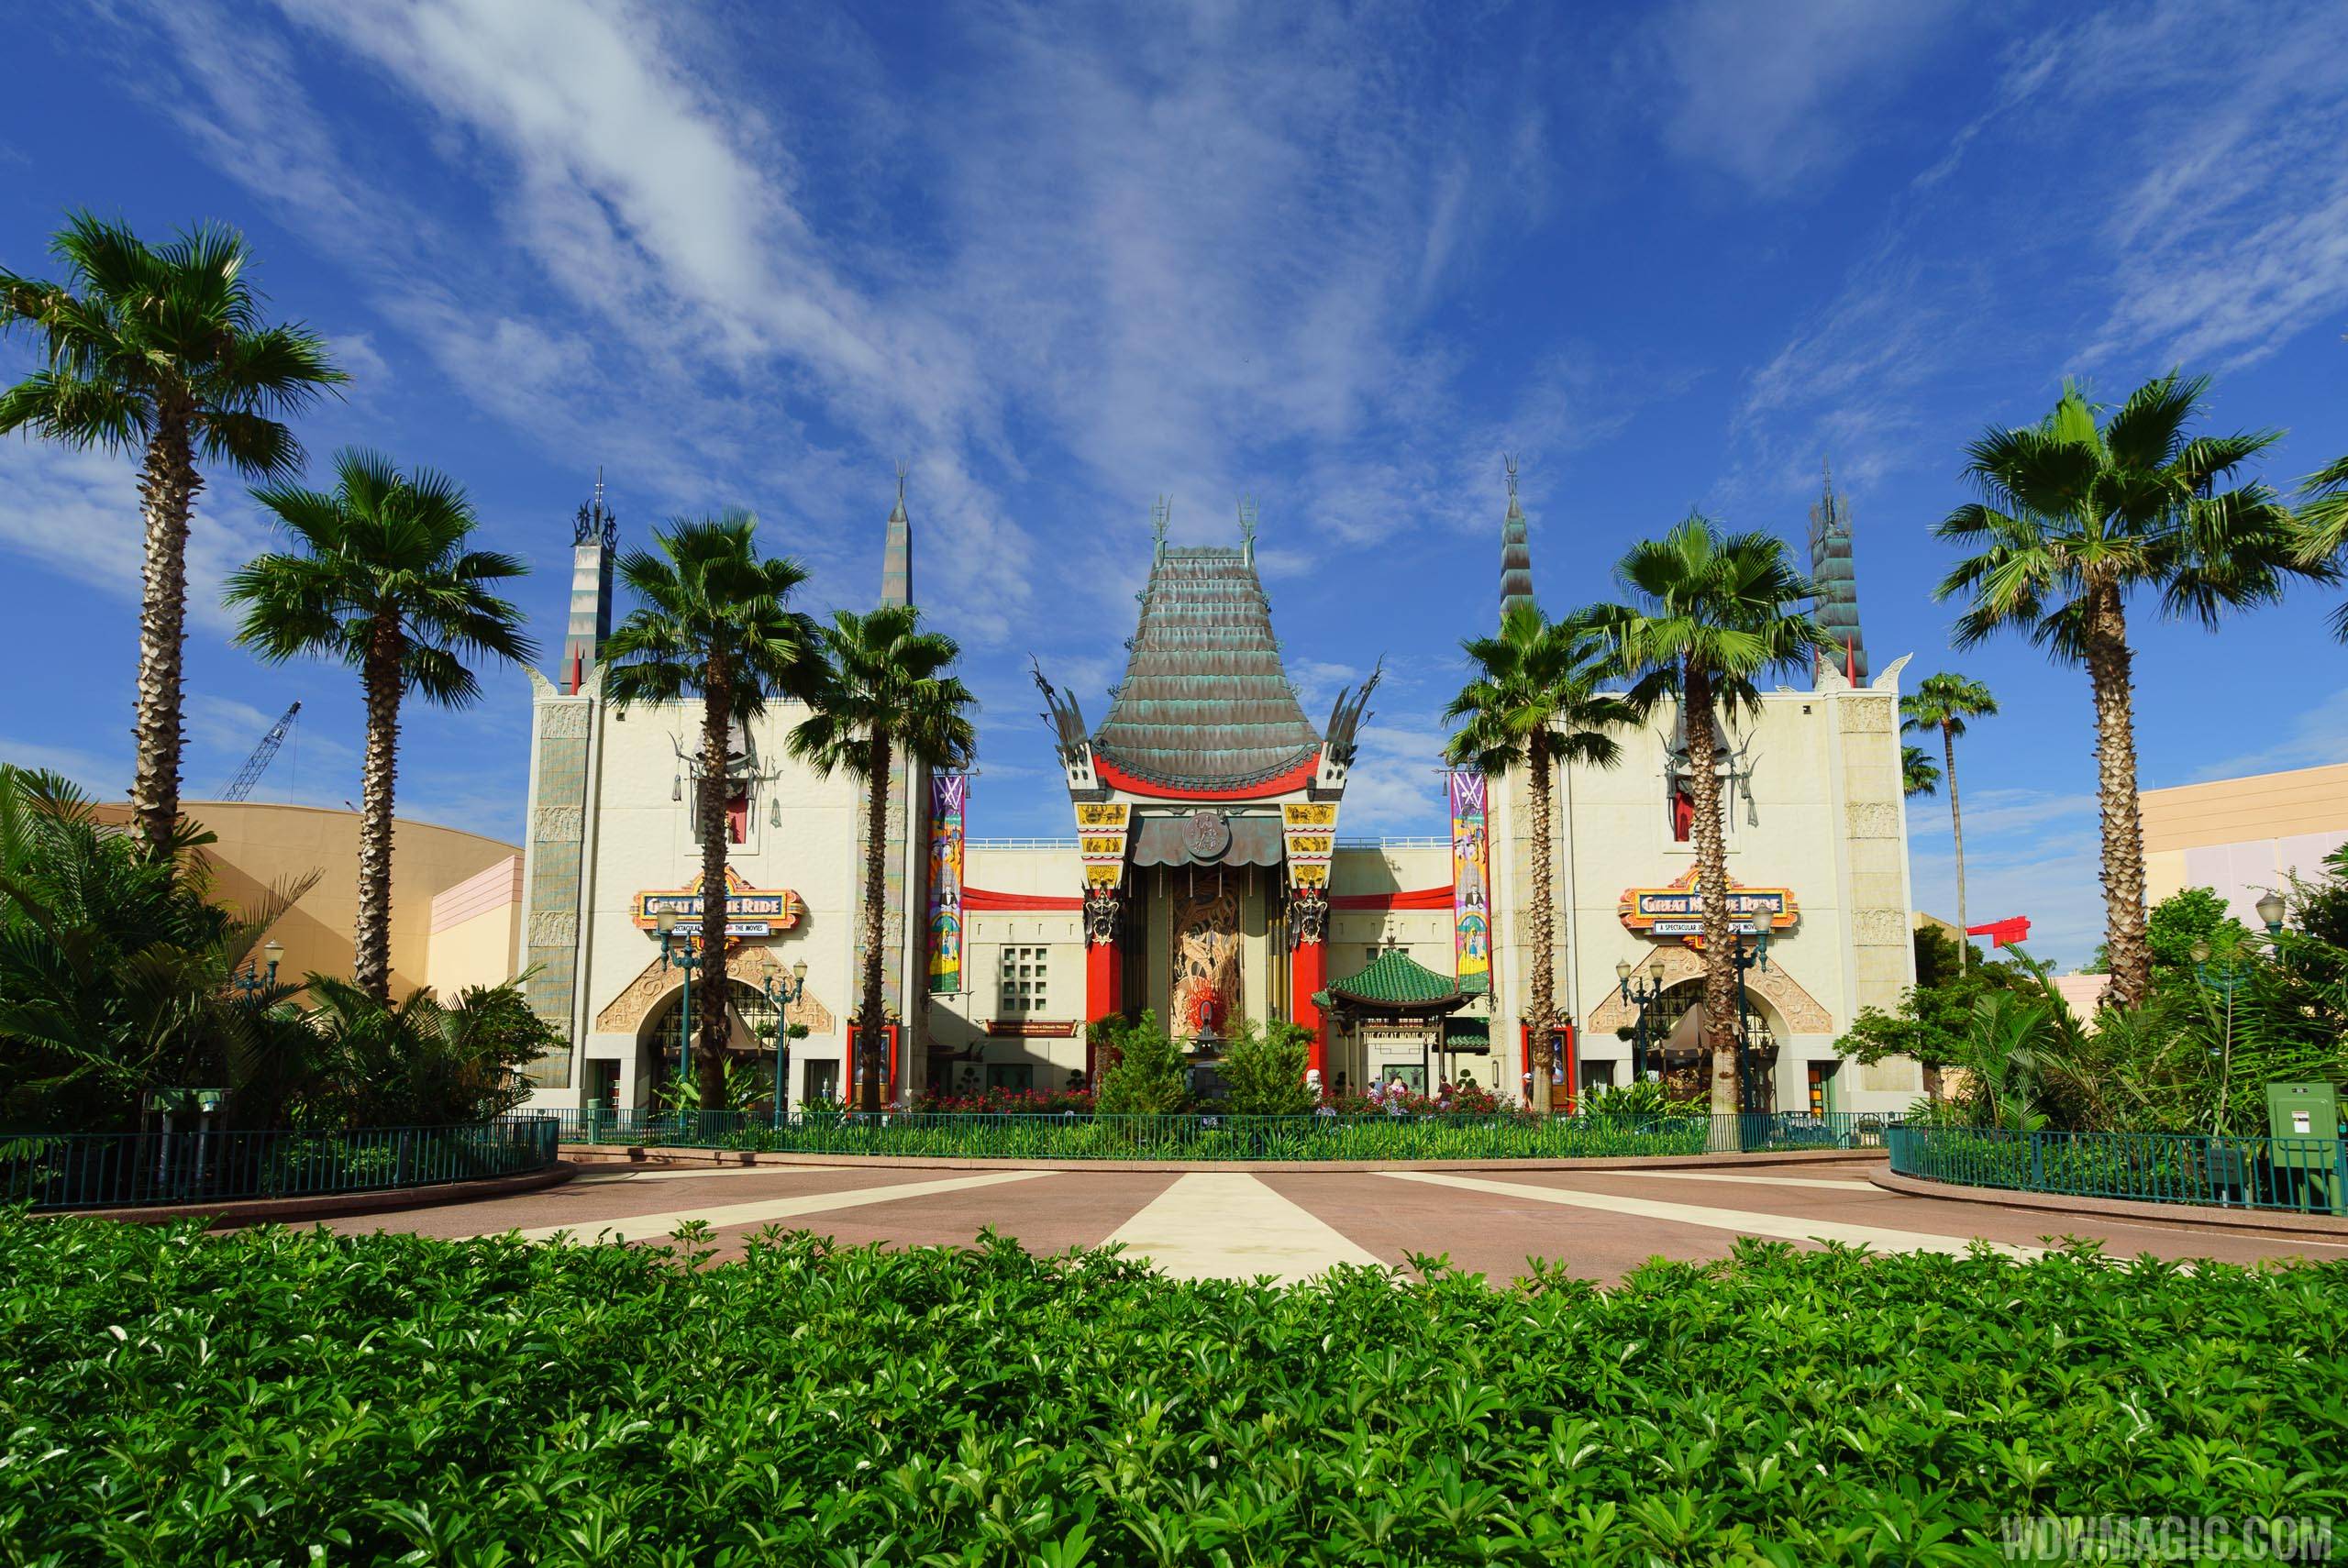 Great Movie Ride reopens after refurbishment